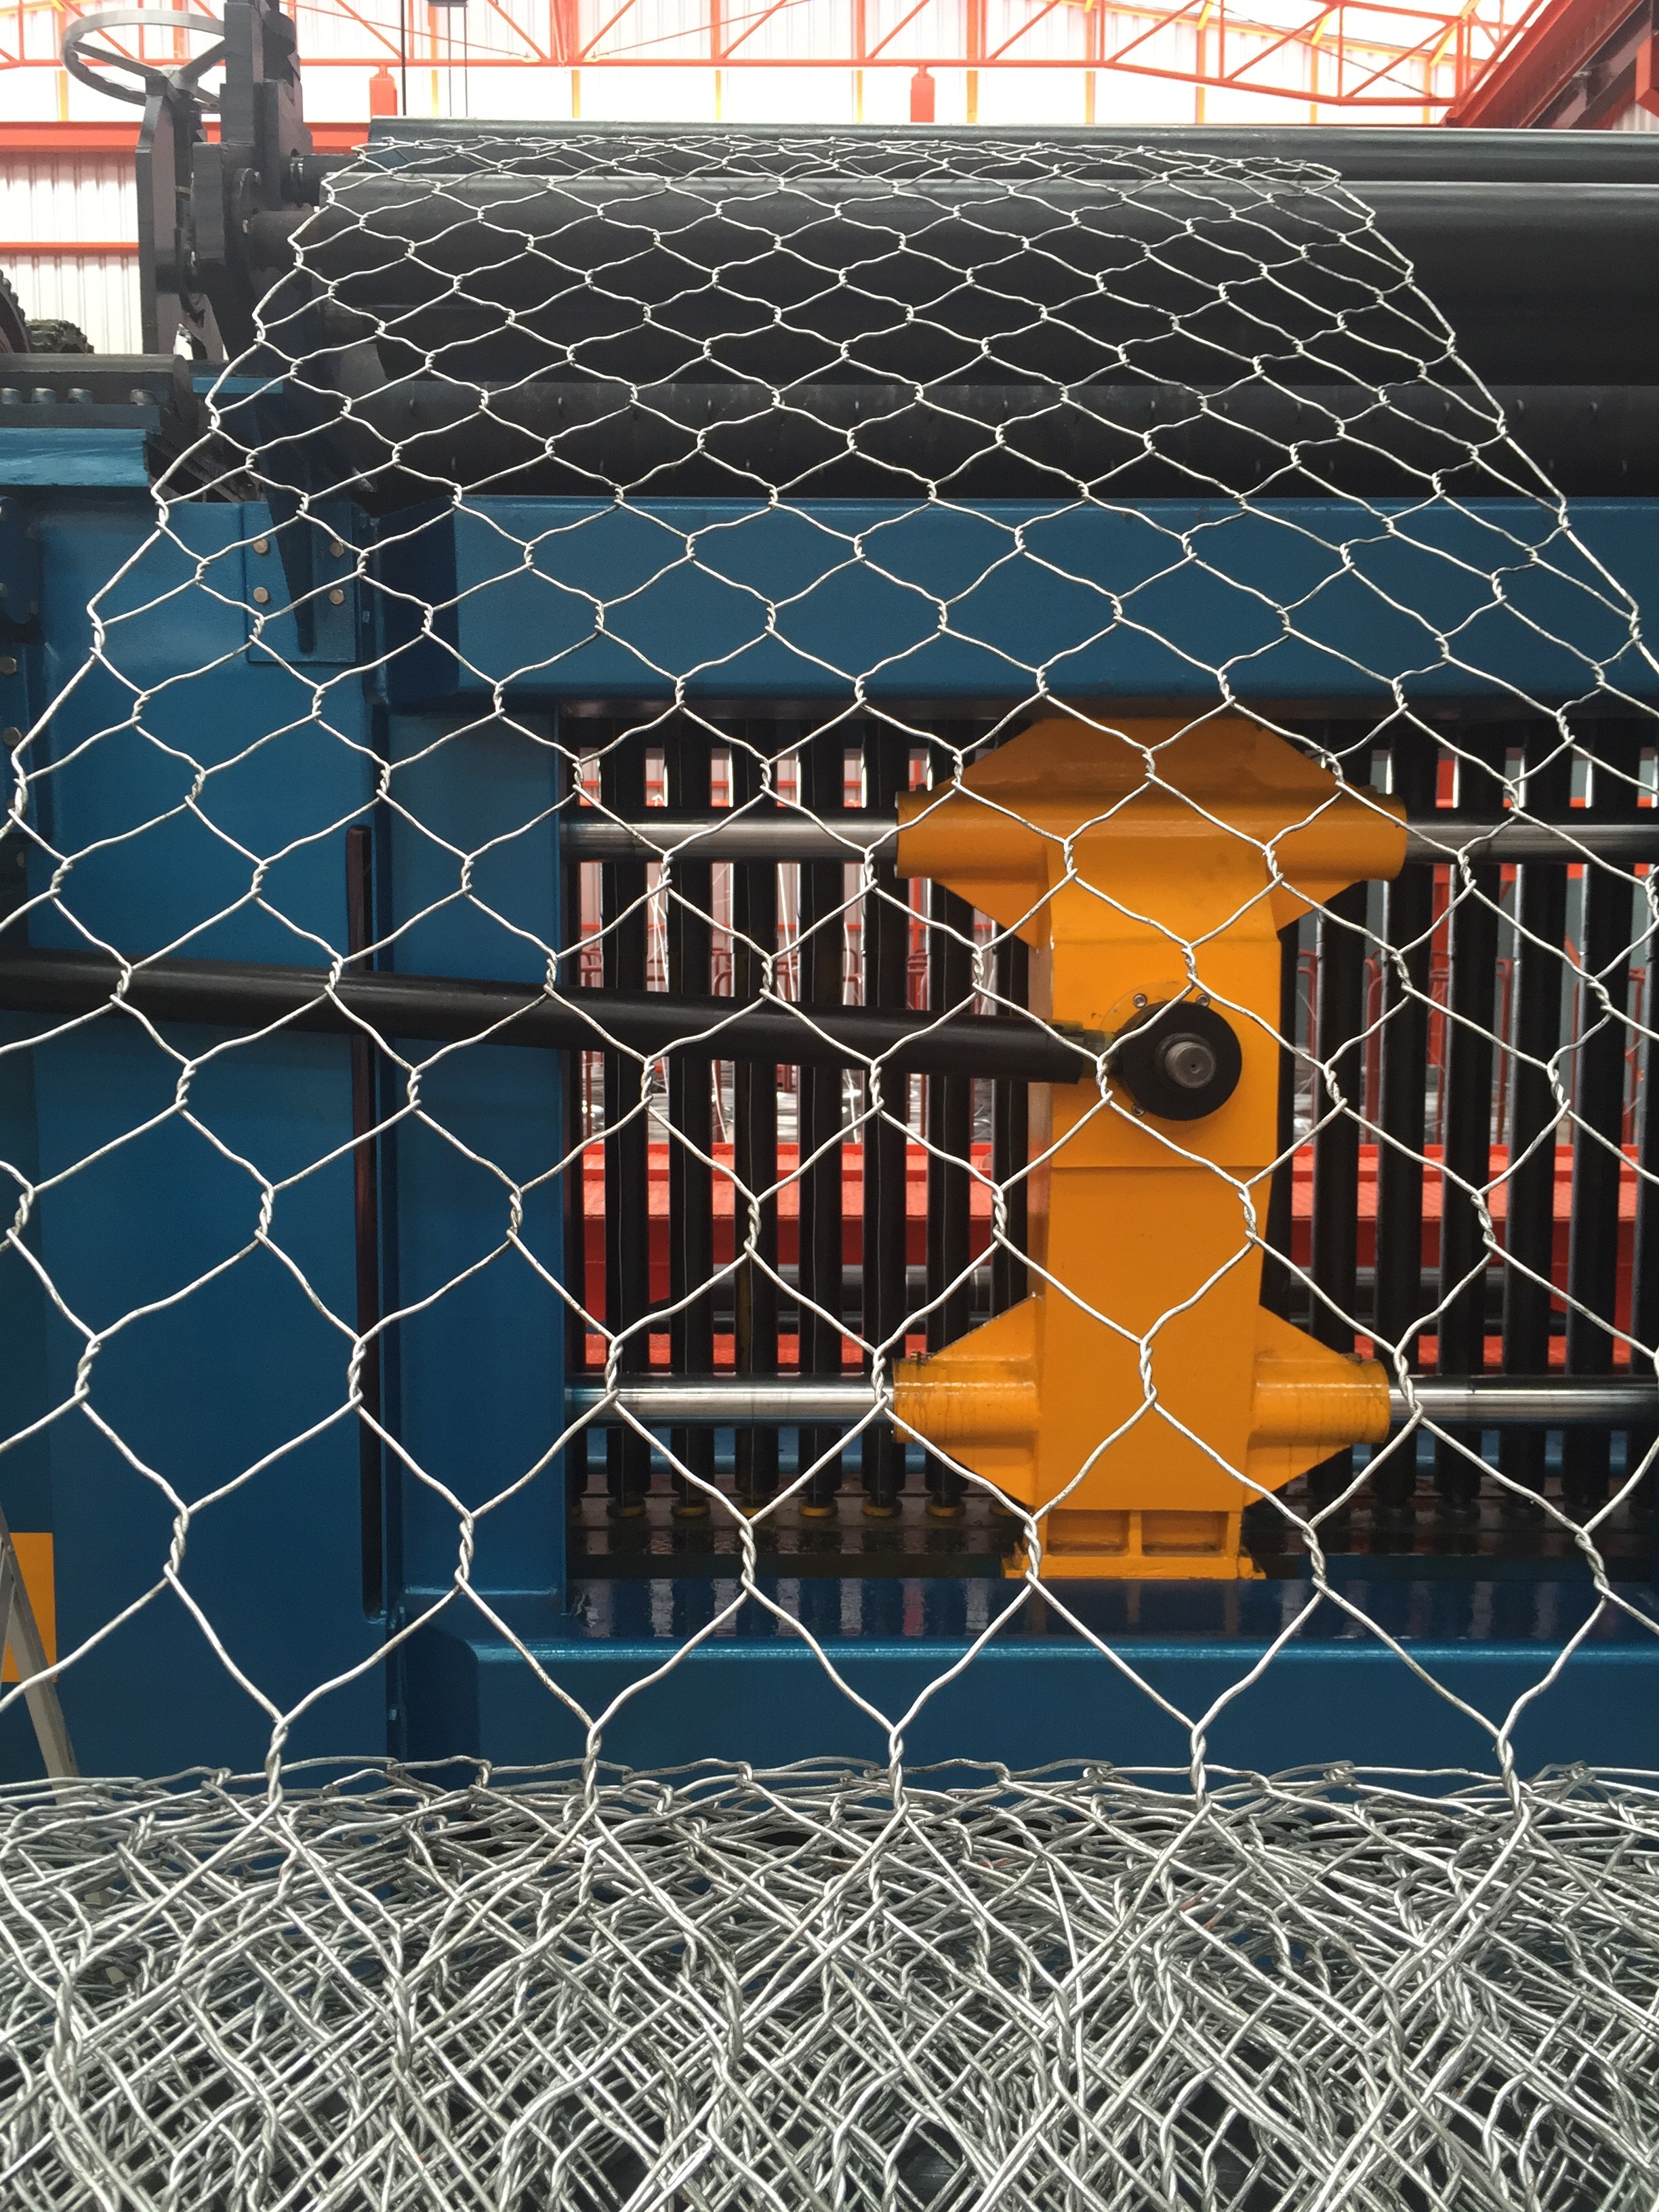 What is the mesh size of a gabion basket produced by a machine?